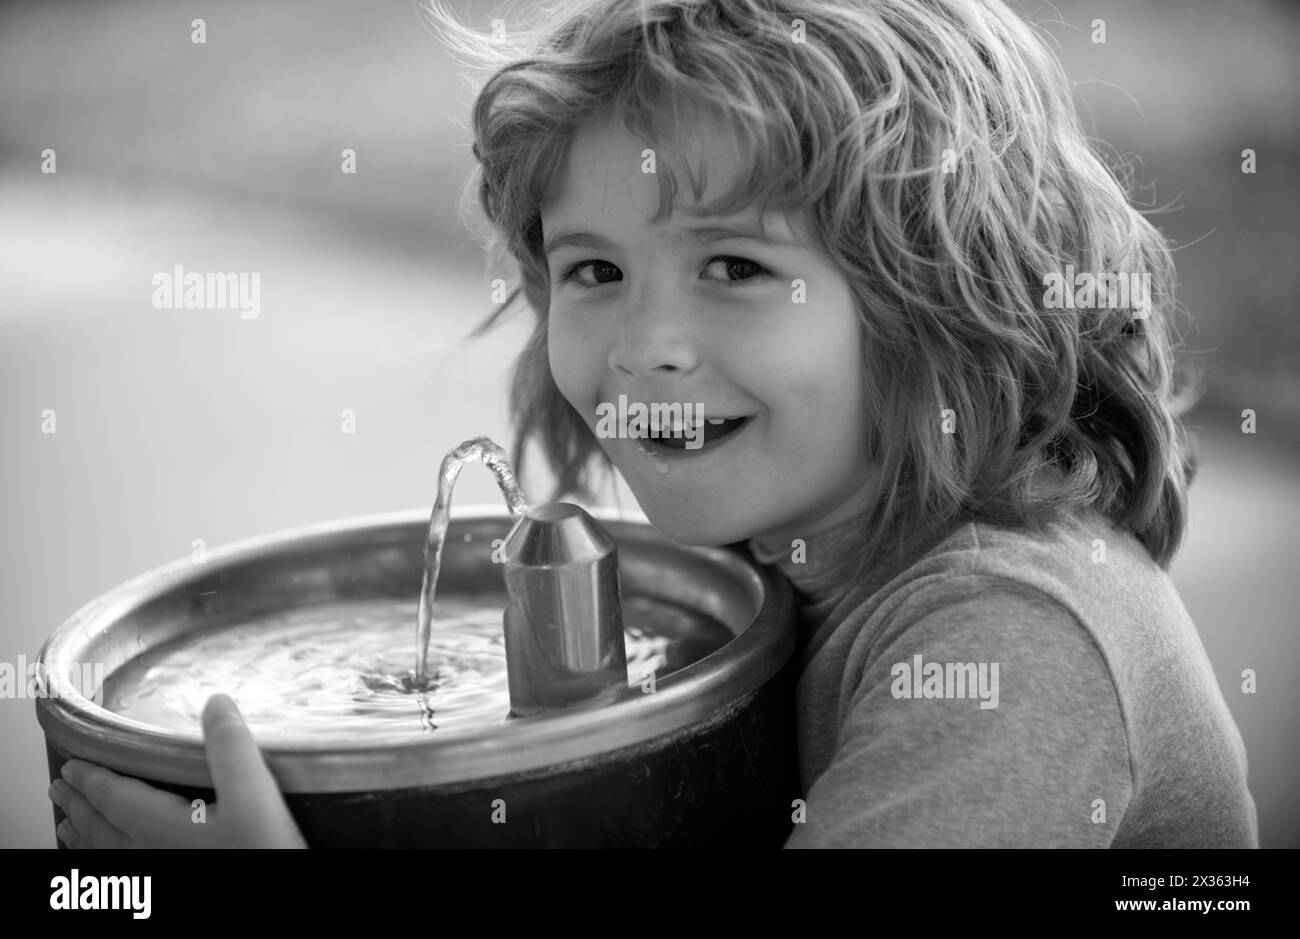 Face close up portrait of kid drinking water from outdoor water fountain outdoor. Stock Photo